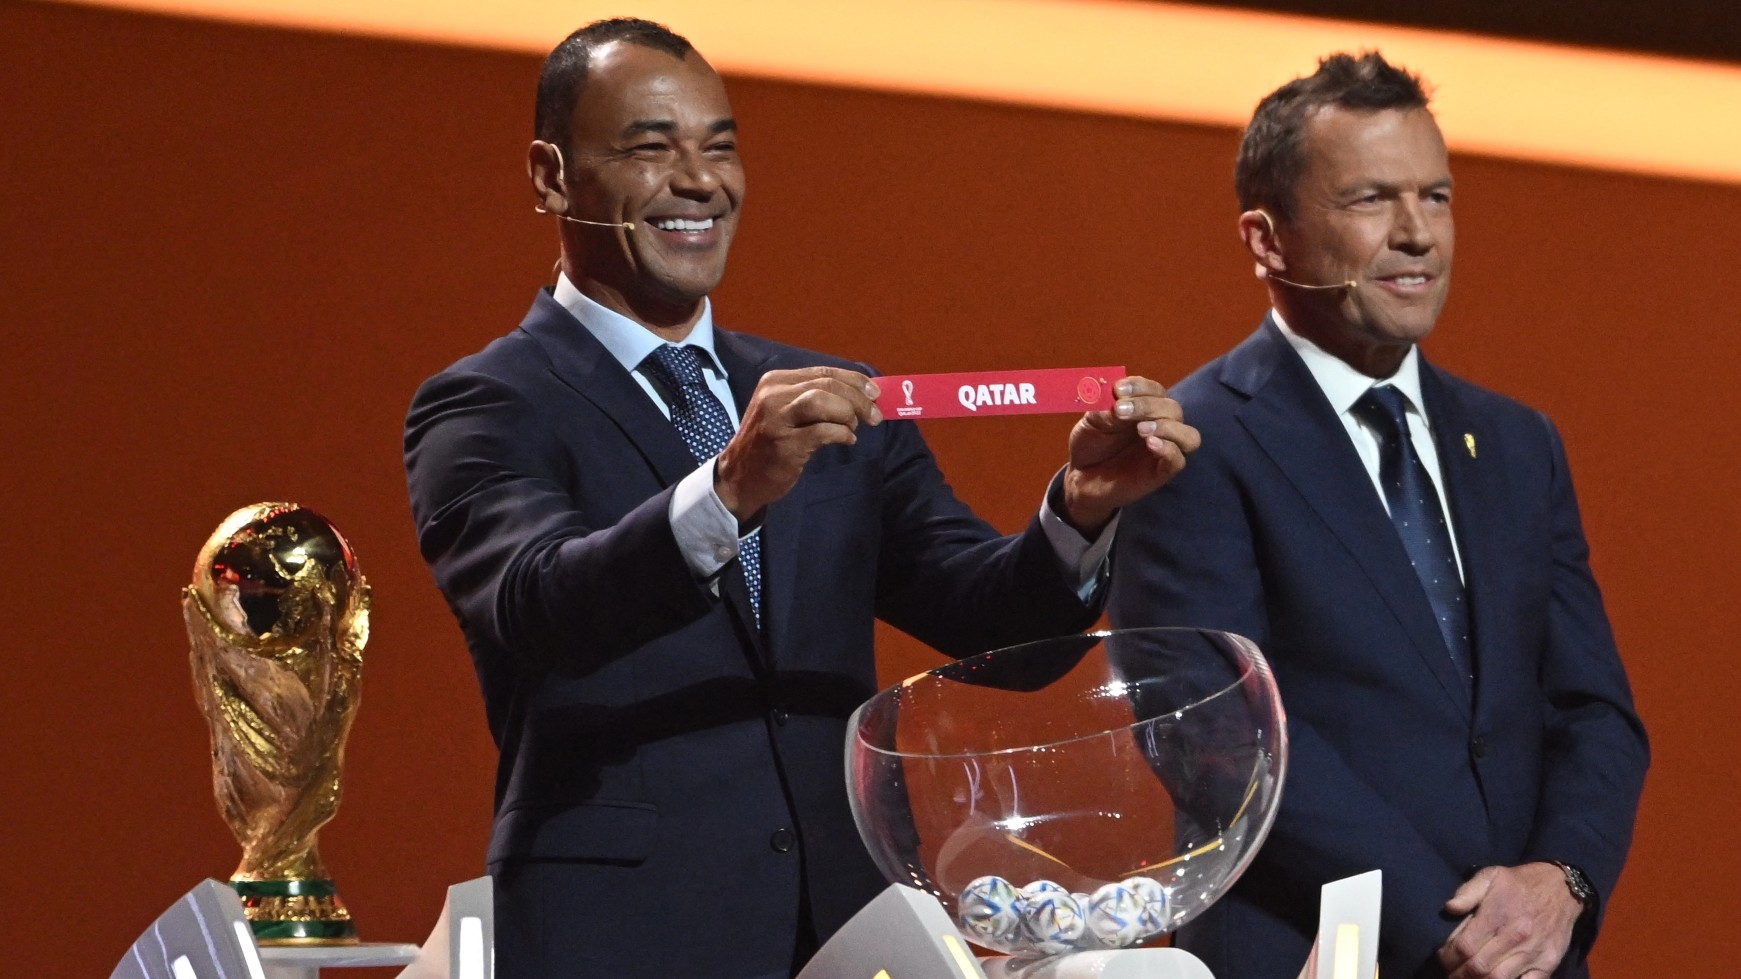 Qatar 2022 will be the first World Cup held in the Middle East